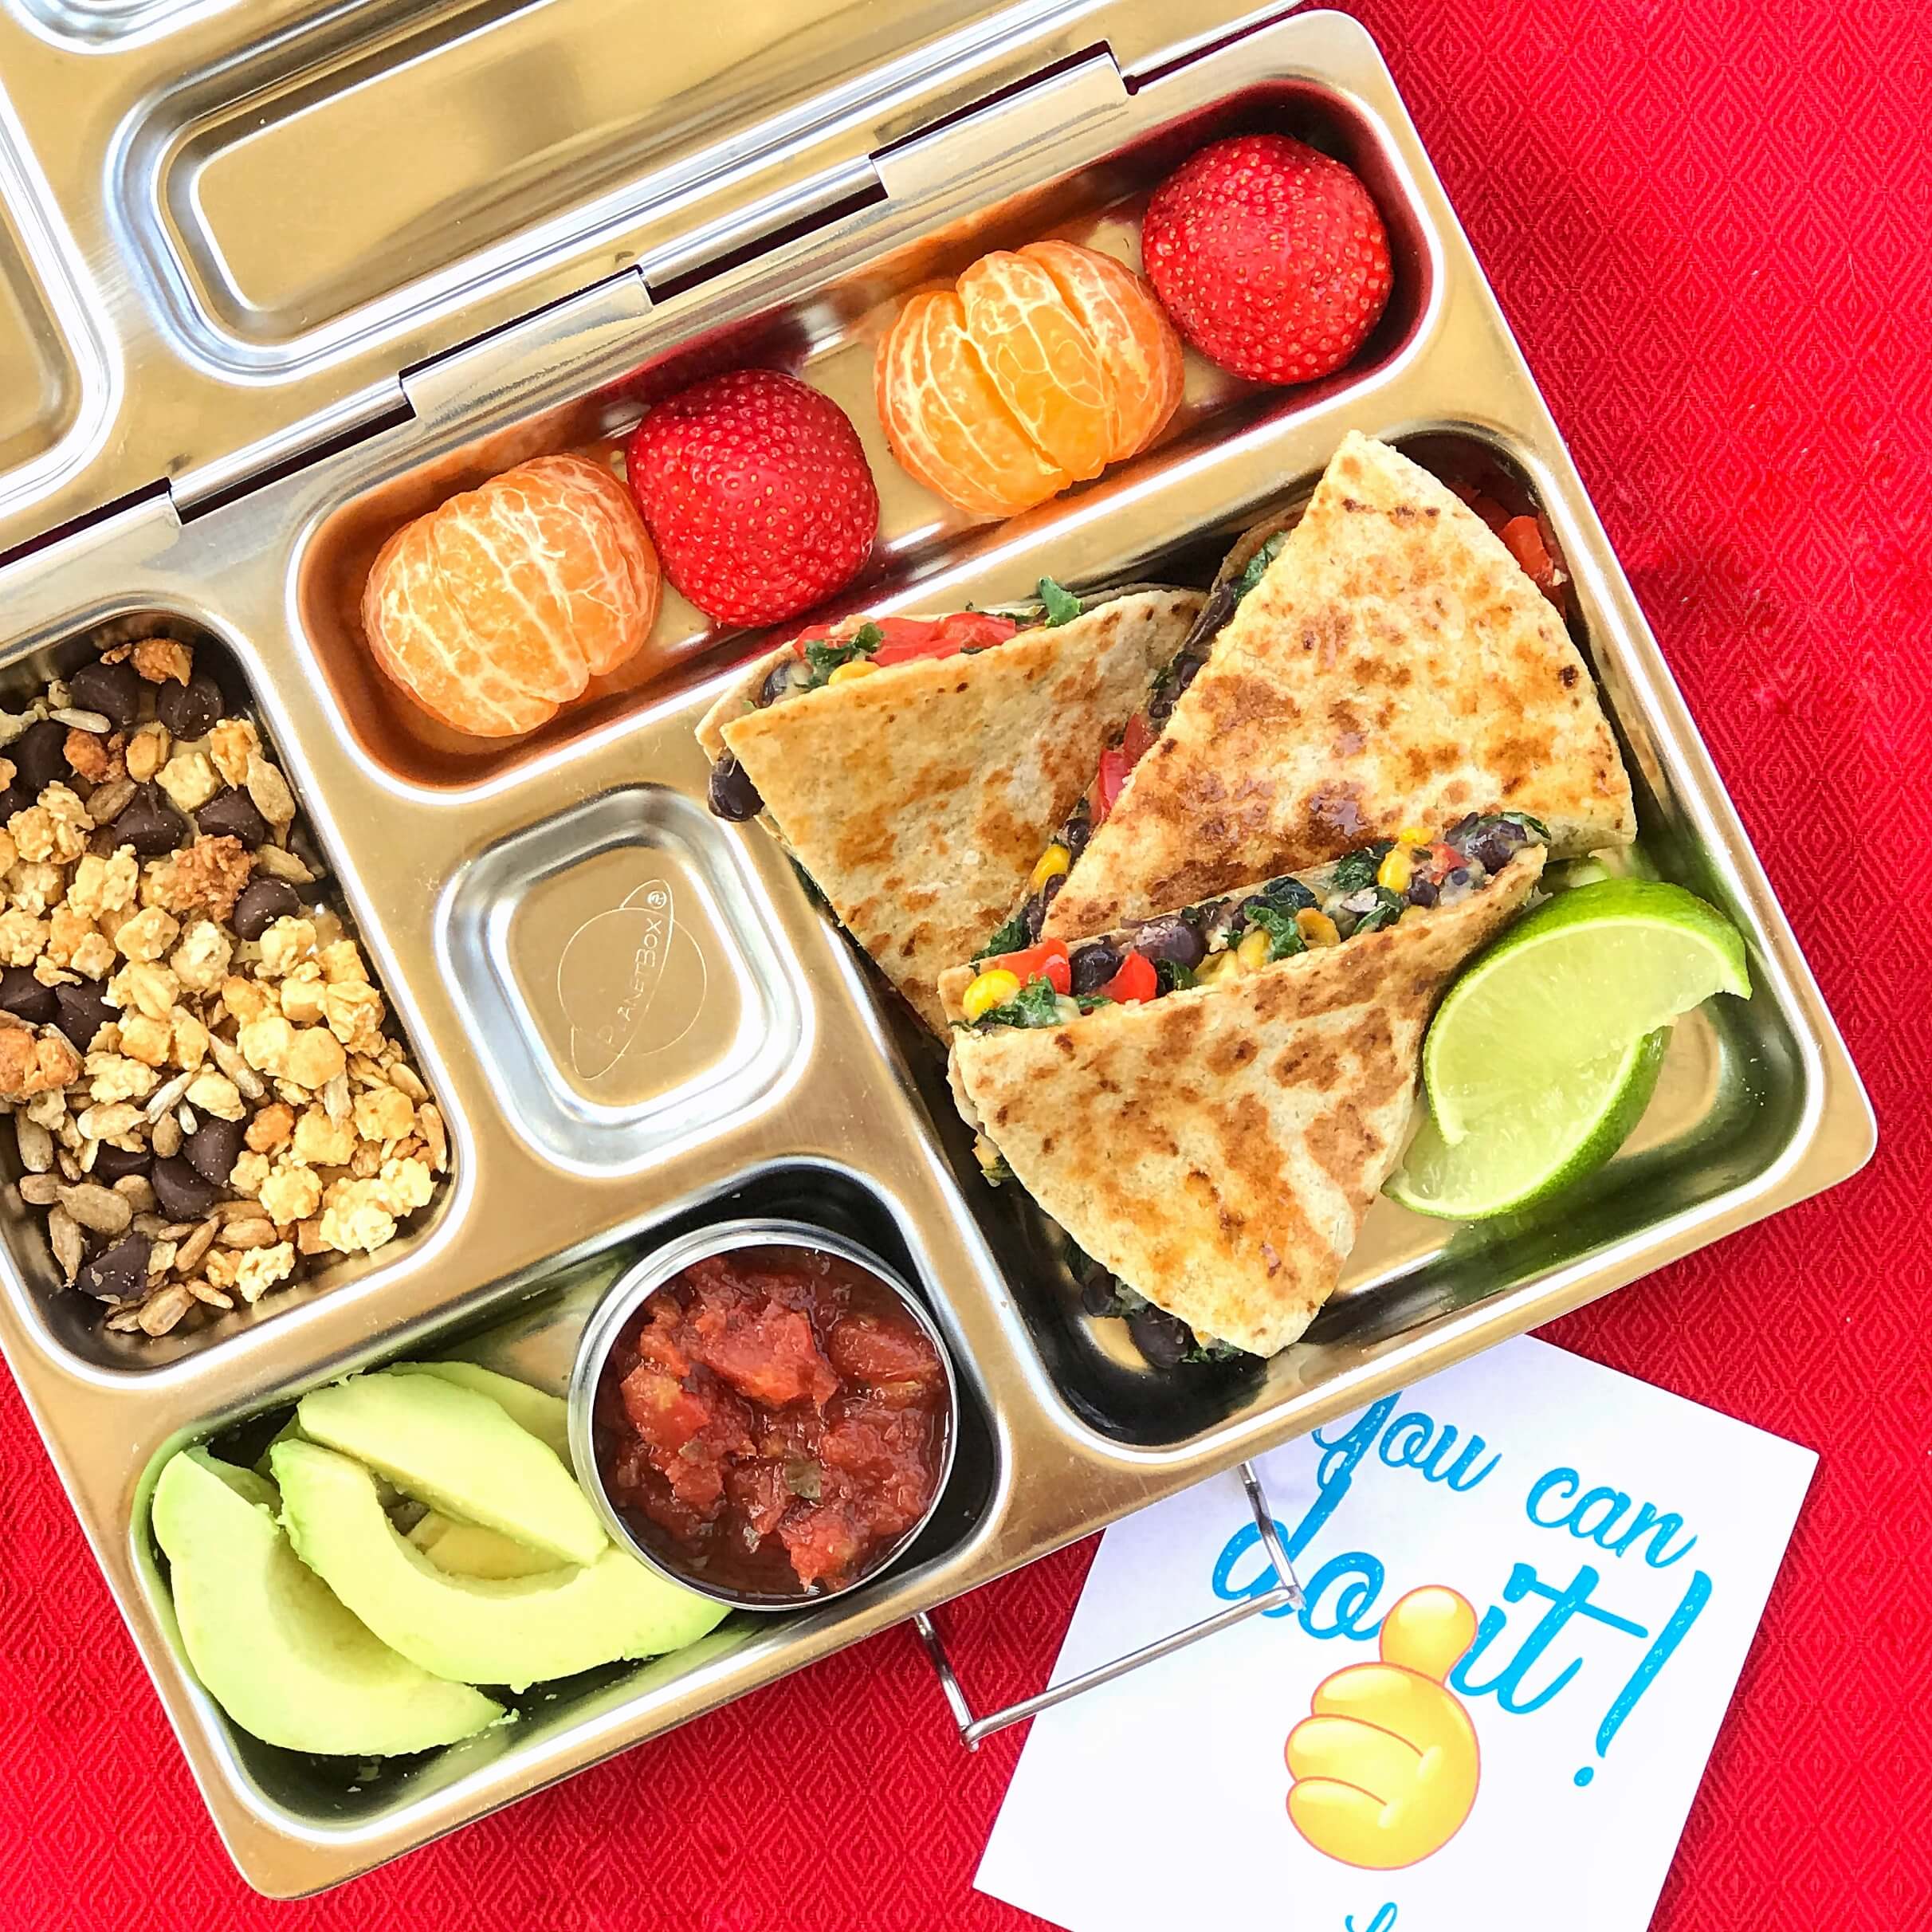 40 Lunchbox Ideas for Toddler Children - Inspiration for every day!